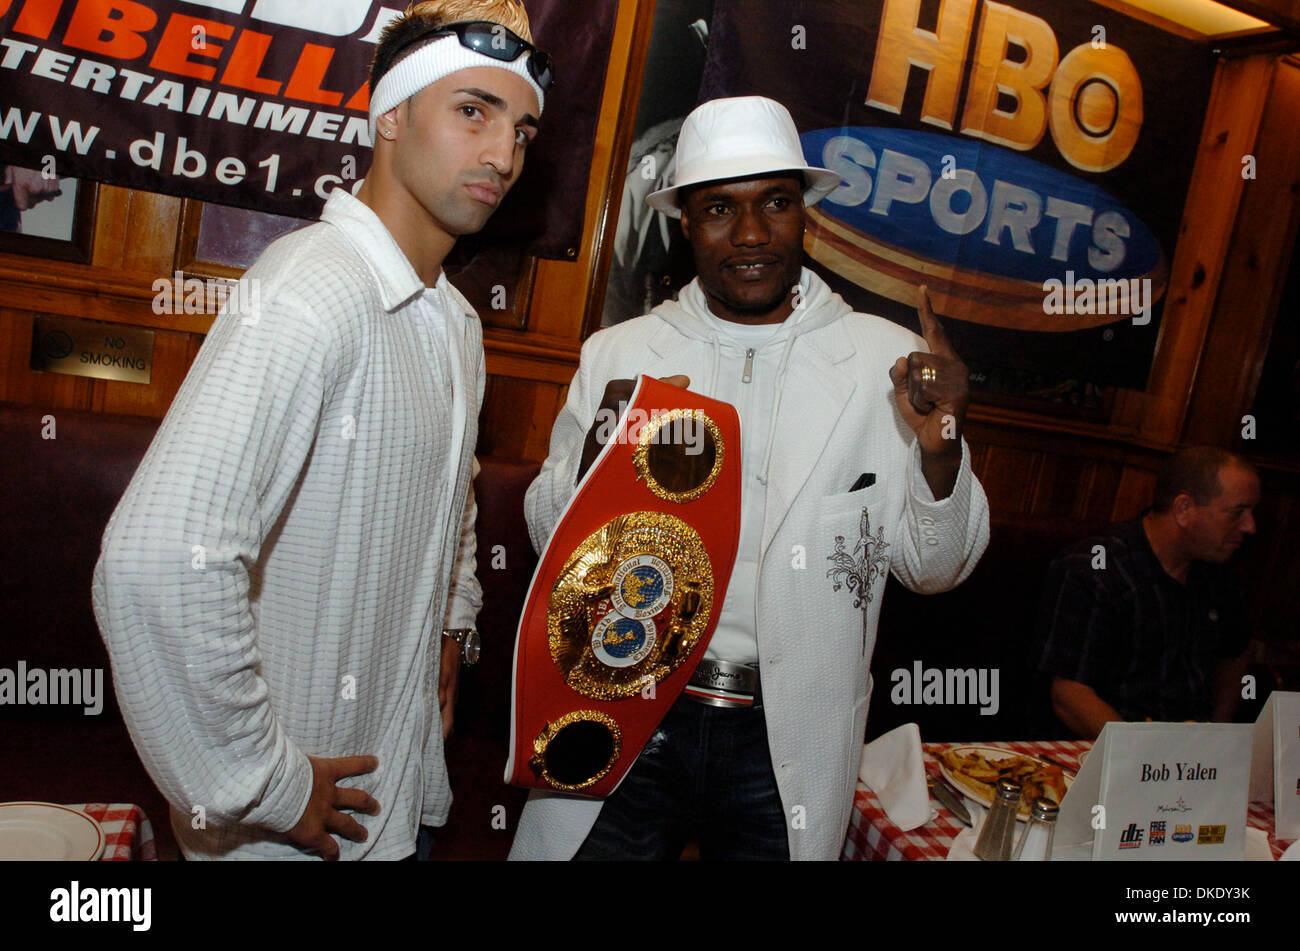 Jun 13, 2007 - Manhattan, NY, USA - Challenger PAULIE MALIGNAGGI (L) and title holder LOVEMORE N'DOU (R), holding the championship belt, pose for a photograph. Gallagher's Steakhouse hosts a press conference promoting the IBF Junior Welterweight Championship bout as Paulie Maliginaggi, of Bensonhurst Brooklyn challenges veteran world titlist Lovemore N'dou this Saturday night, June Stock Photo